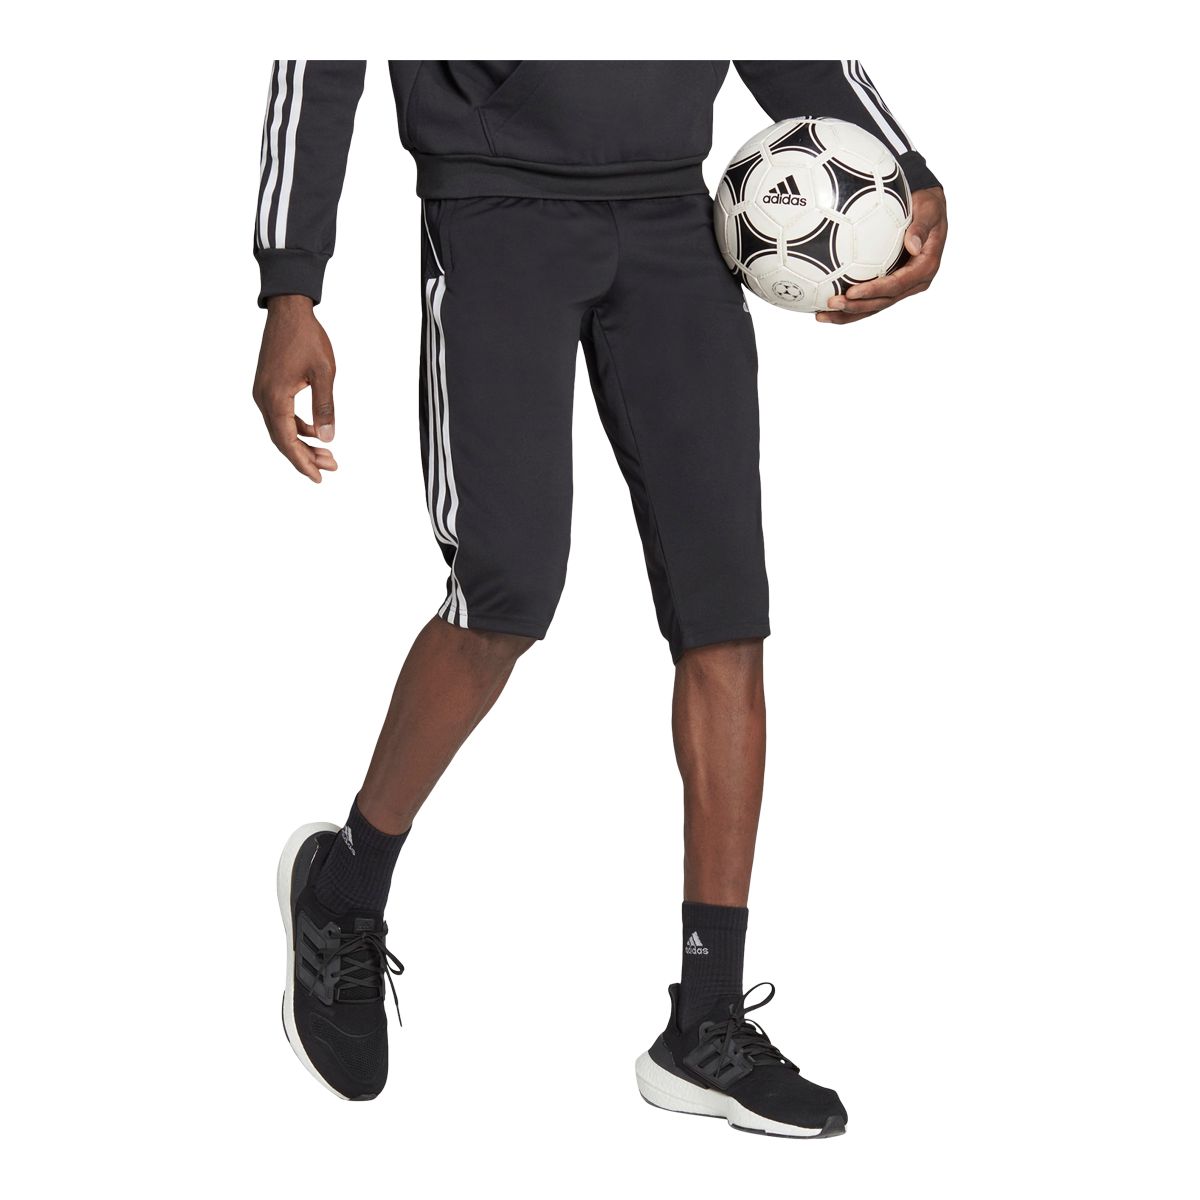 adidas Designed for Gameday training pants men black size XL -  Internet-Sport&Casuals